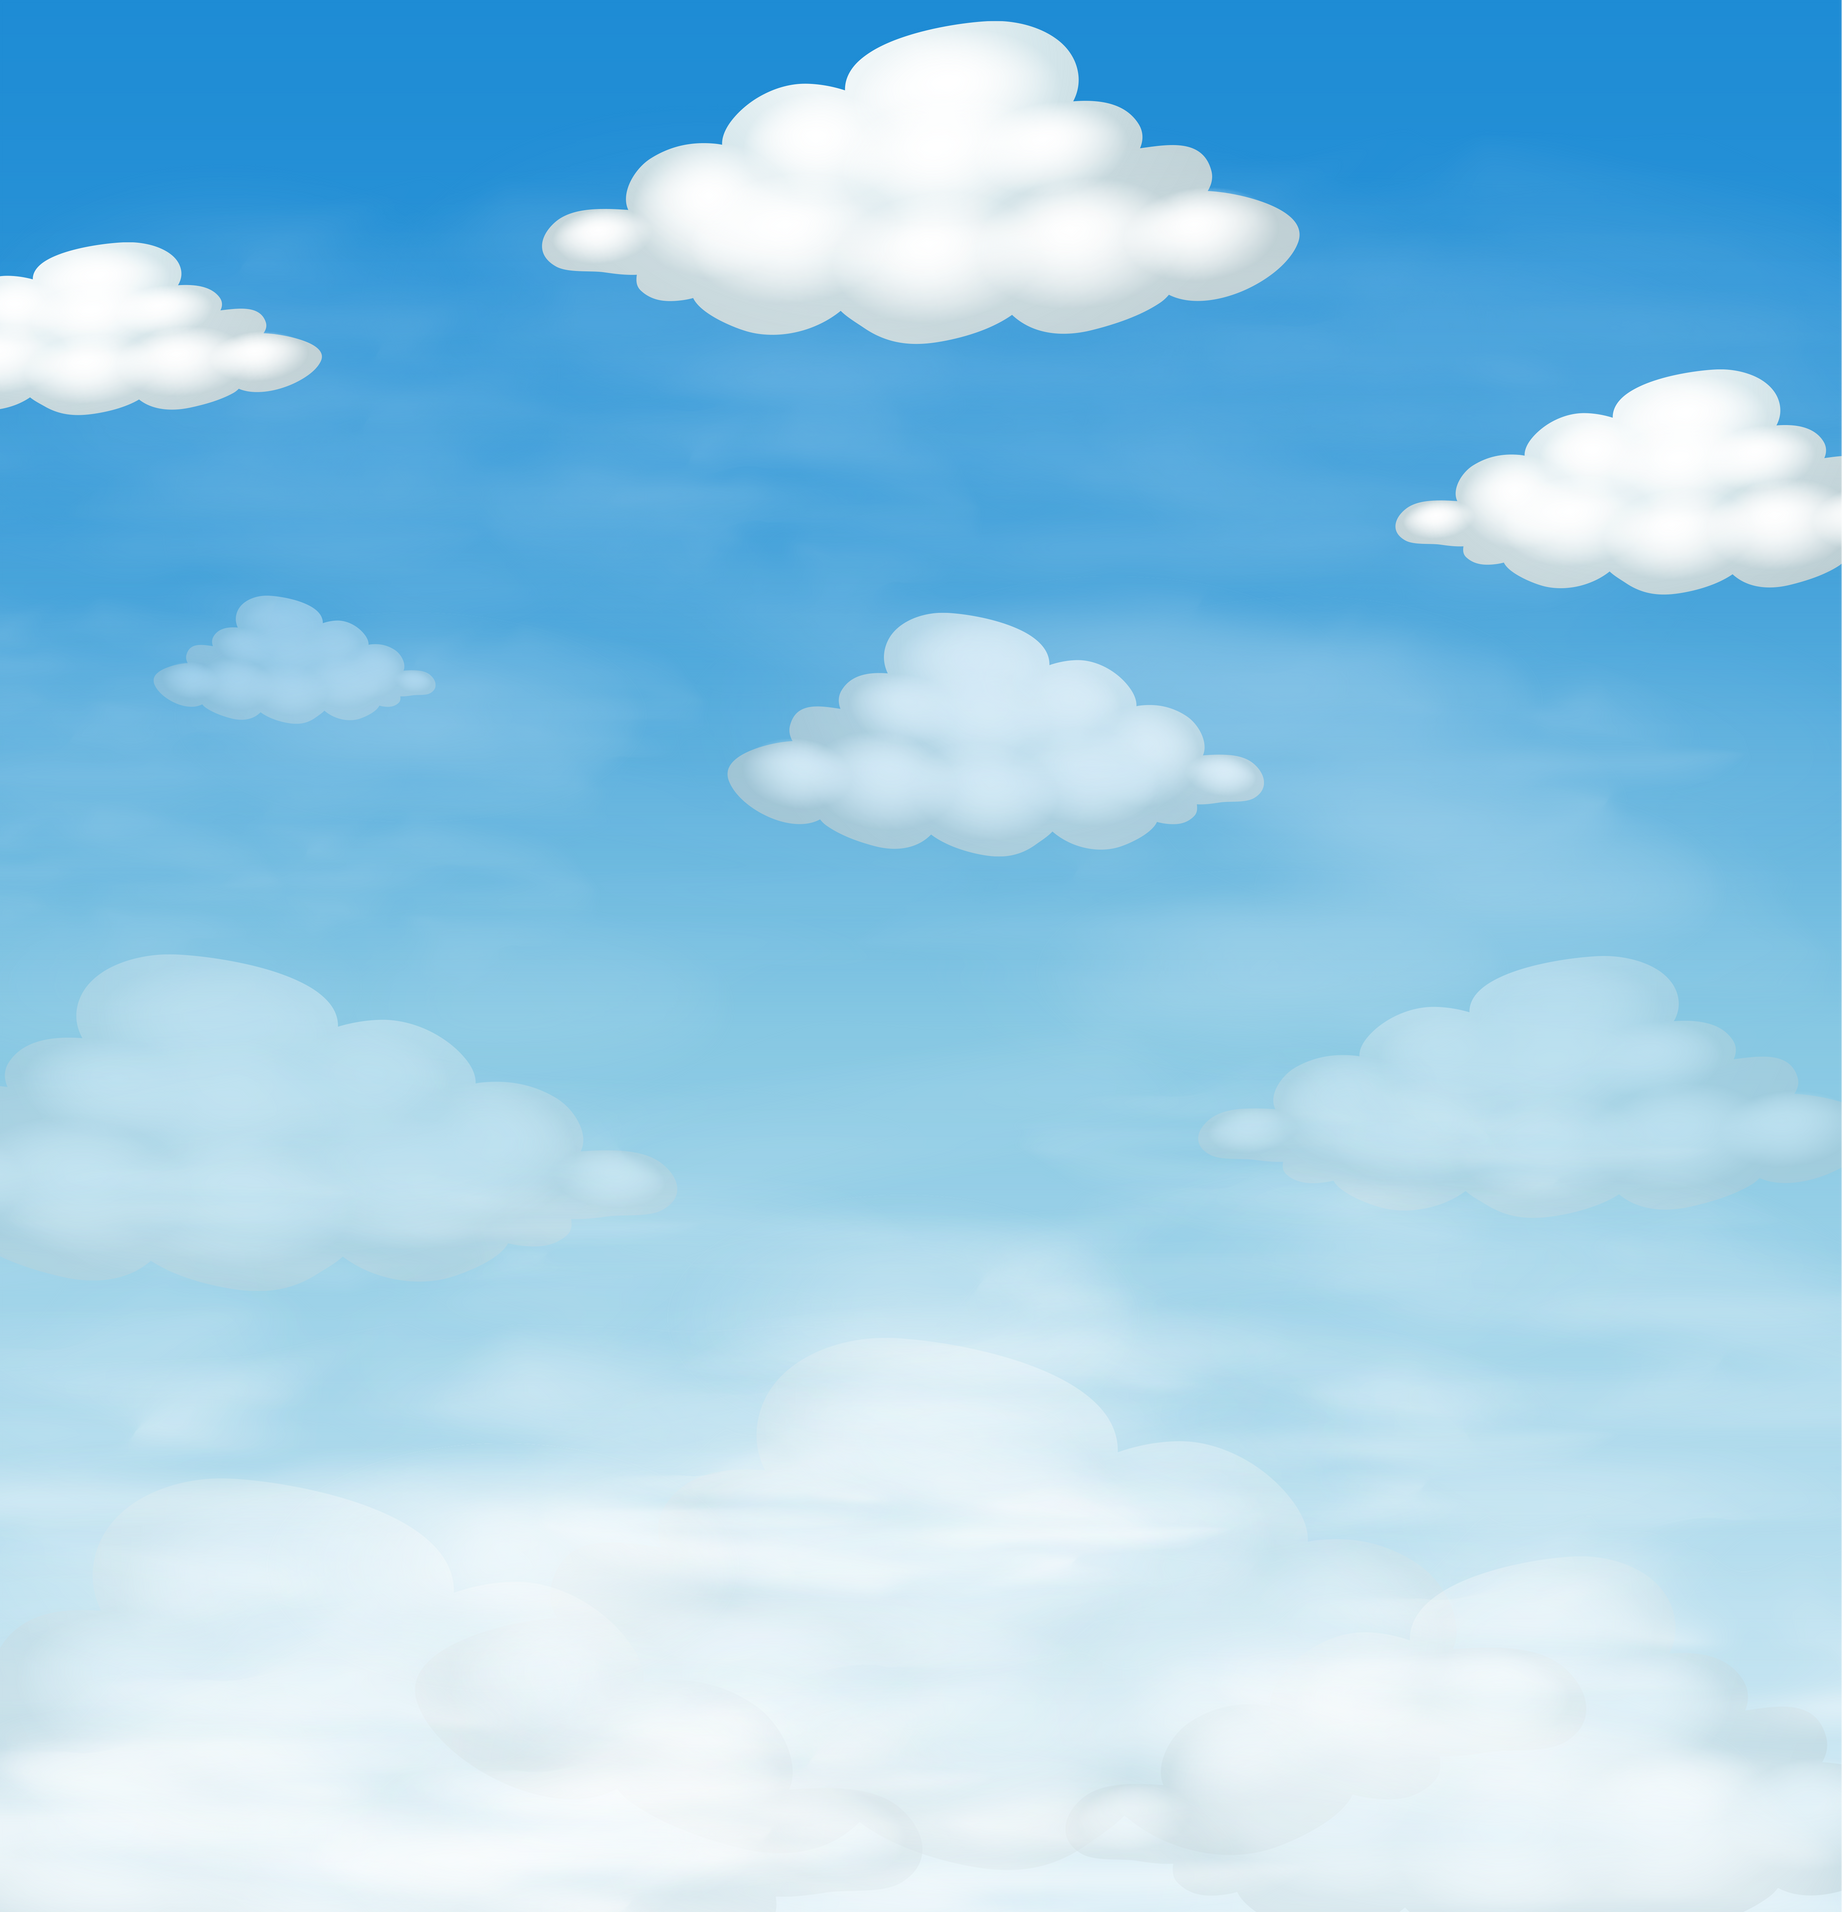 Blue sky and fluffly clouds as background